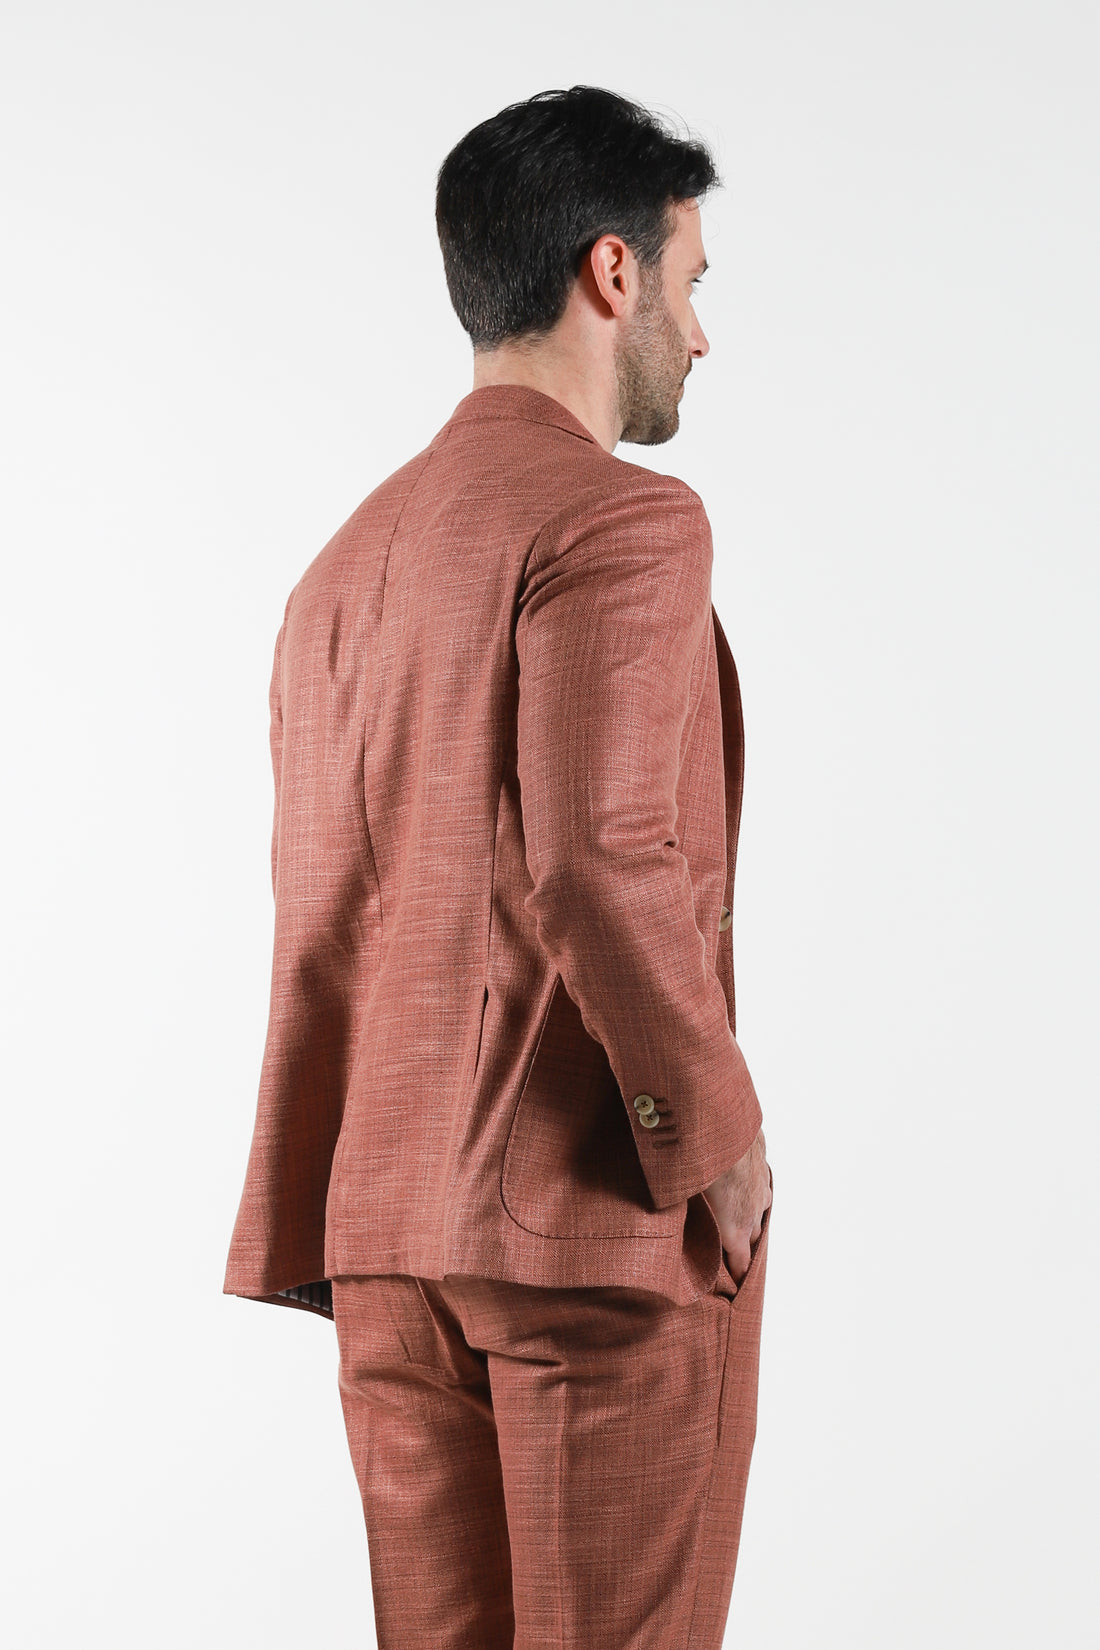 Single-breasted linen-effect suit in the color of Tegola